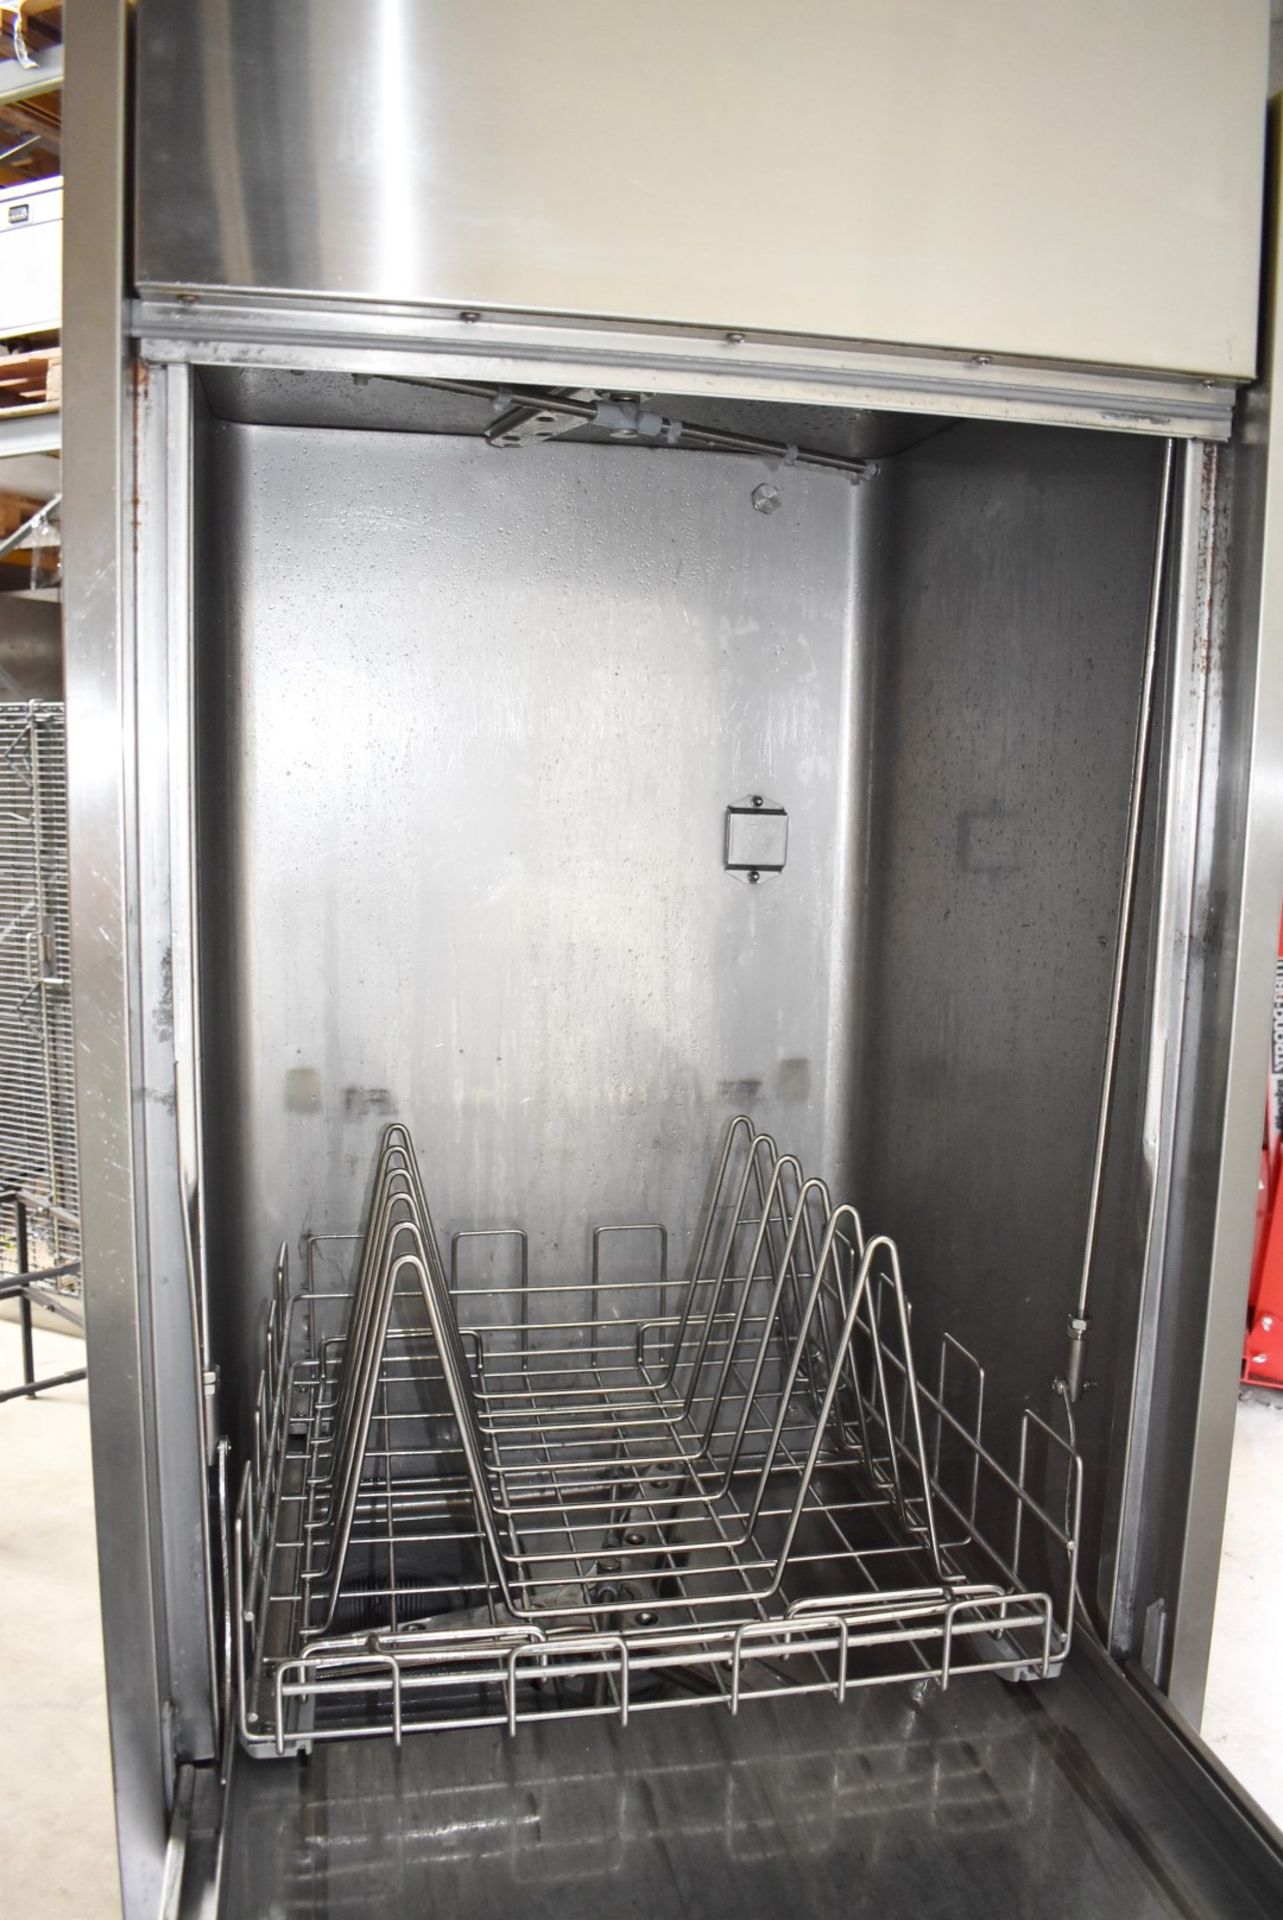 1 x Hobart Upright Heavy Duty Dishwasher For Oven Trays / Cooking Pans - 3 Phase - RRP £17,000! - Image 11 of 14